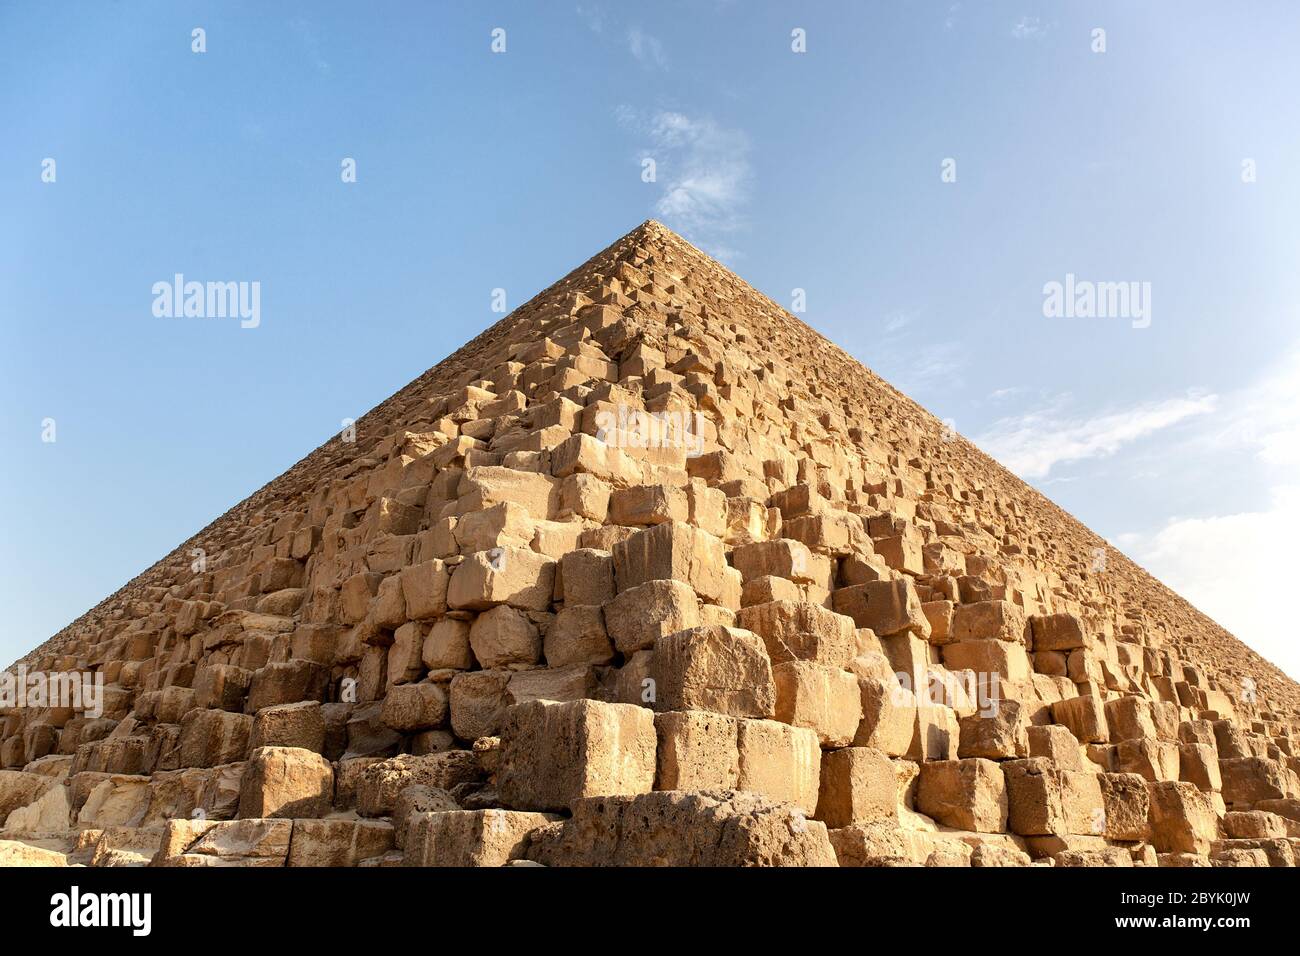 Closeup detail of a Pyramid, Giza, Egypt, against blue sky. The Great Pyramid of Giza is the only remaining of the original Seven Wonders of the world Stock Photo